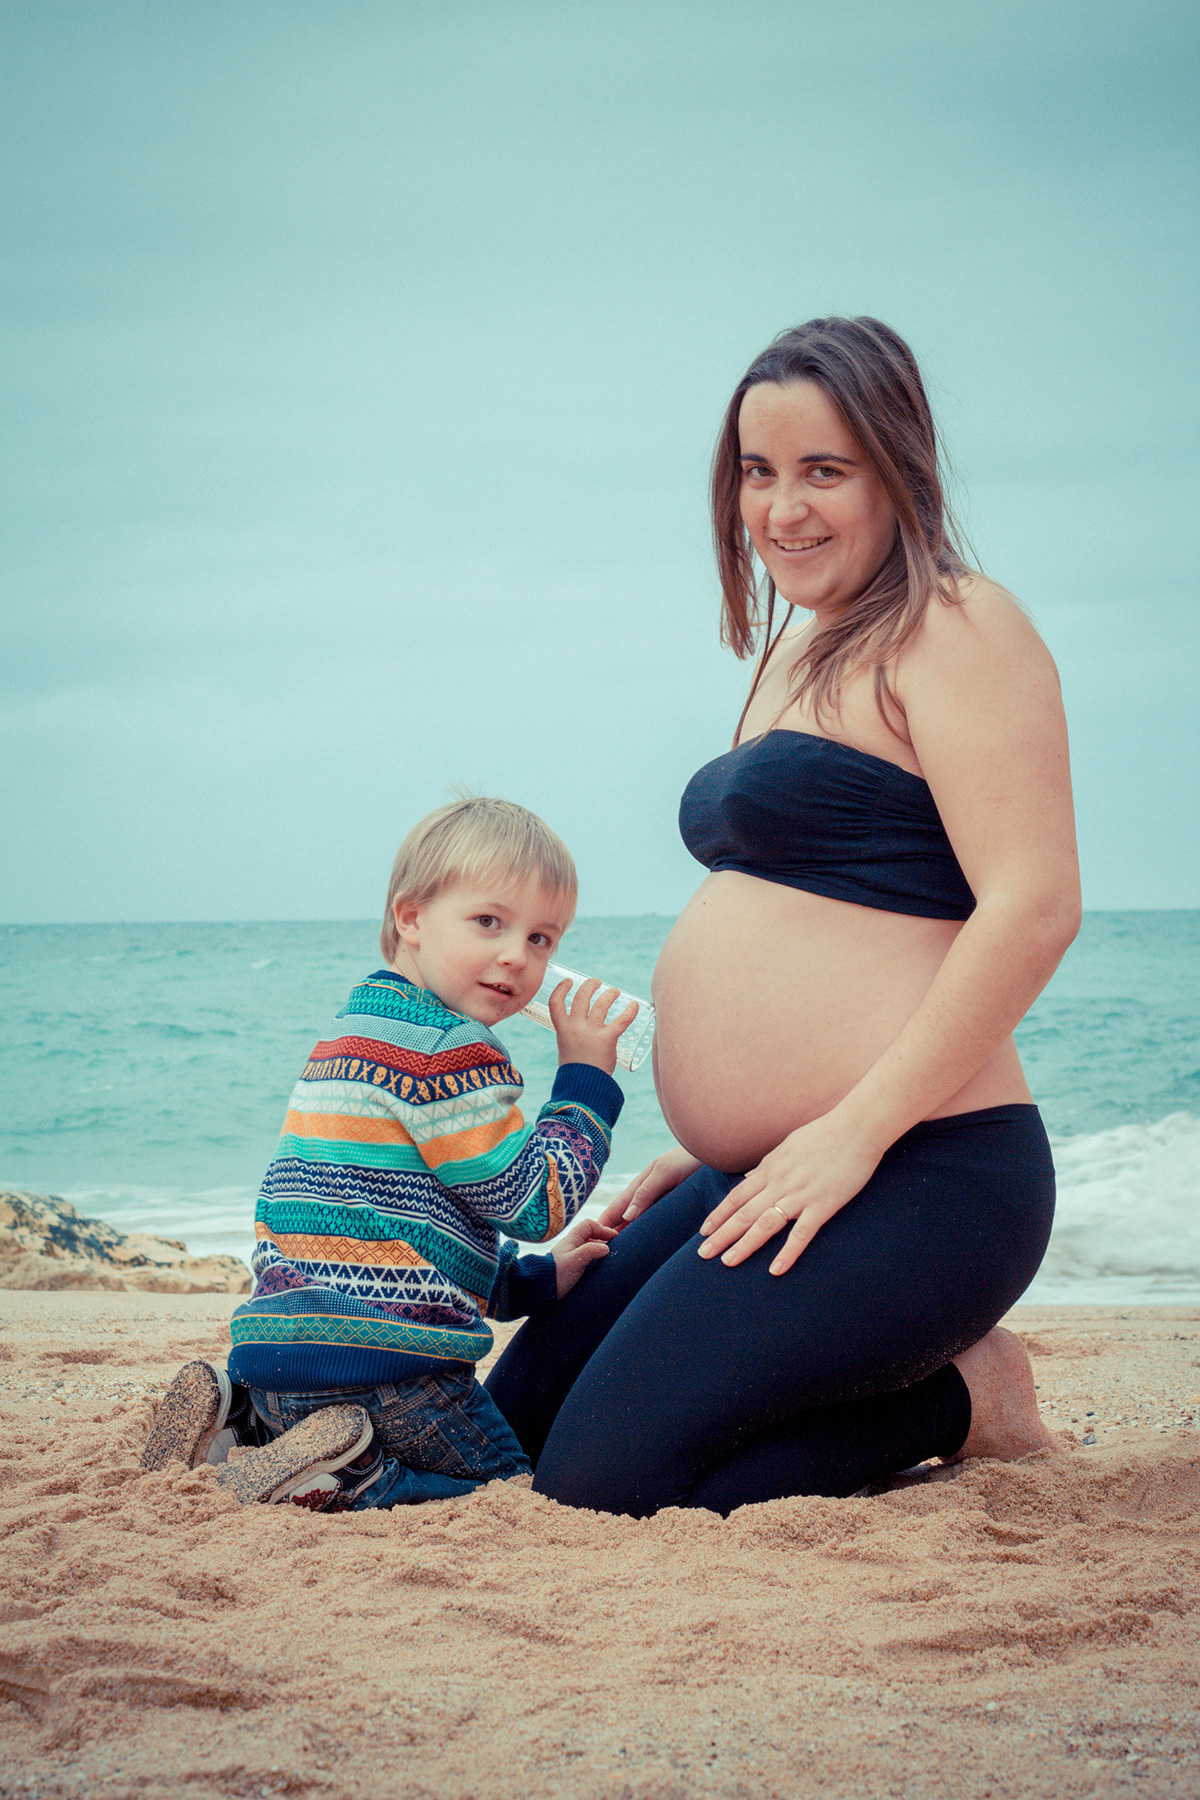 pregnancy pregnant baby kids boy girl woman beach sand house bedroom happyness brothers mother surprise